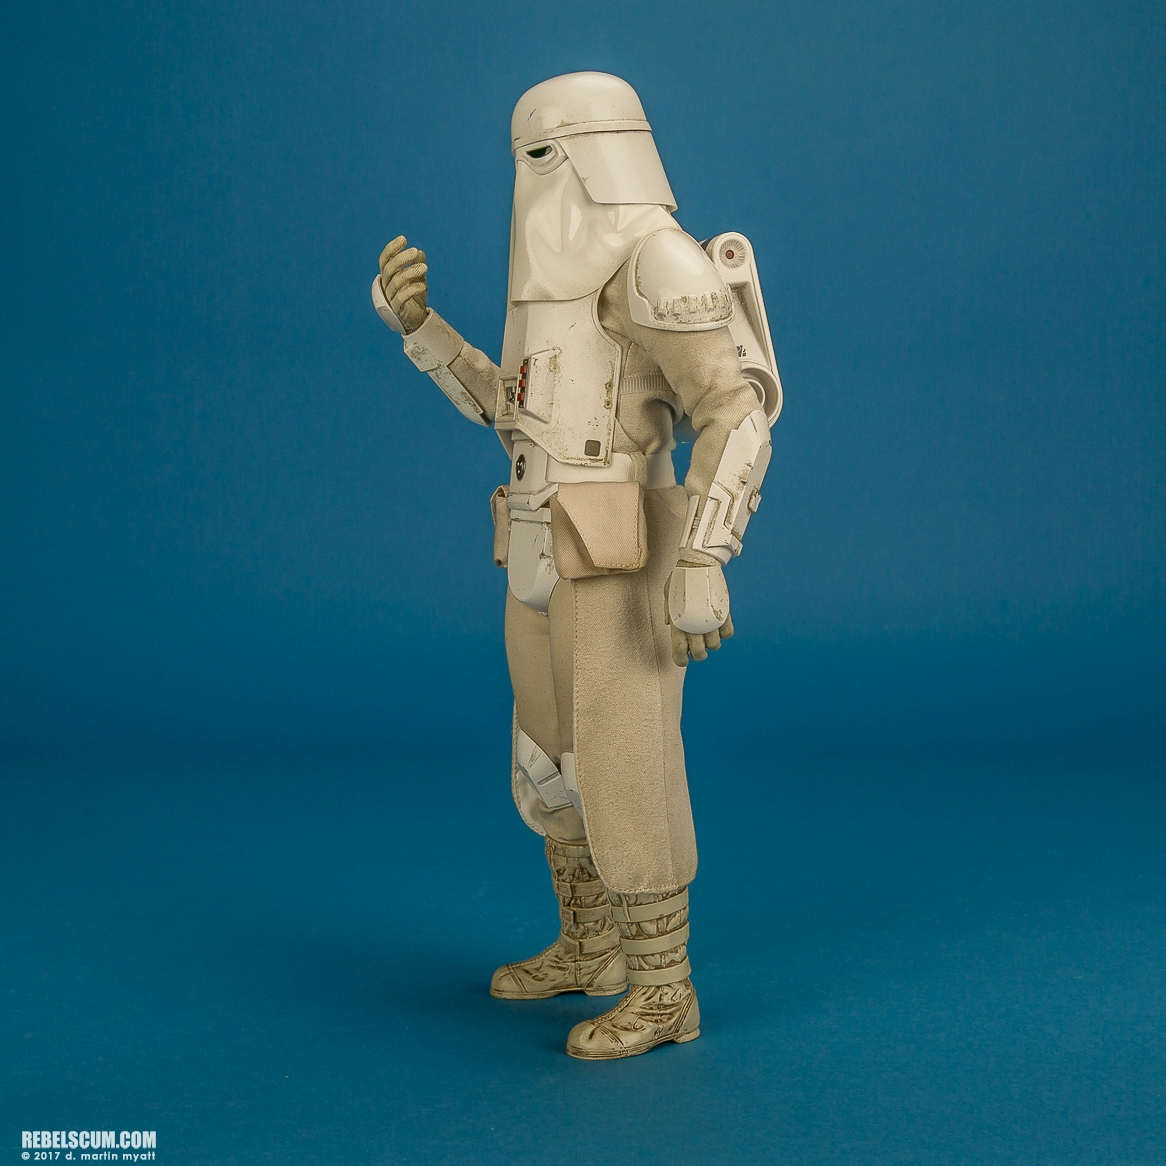 VGM25-Snowtroopers-Two-Pack-Hot-Toys-003.jpg